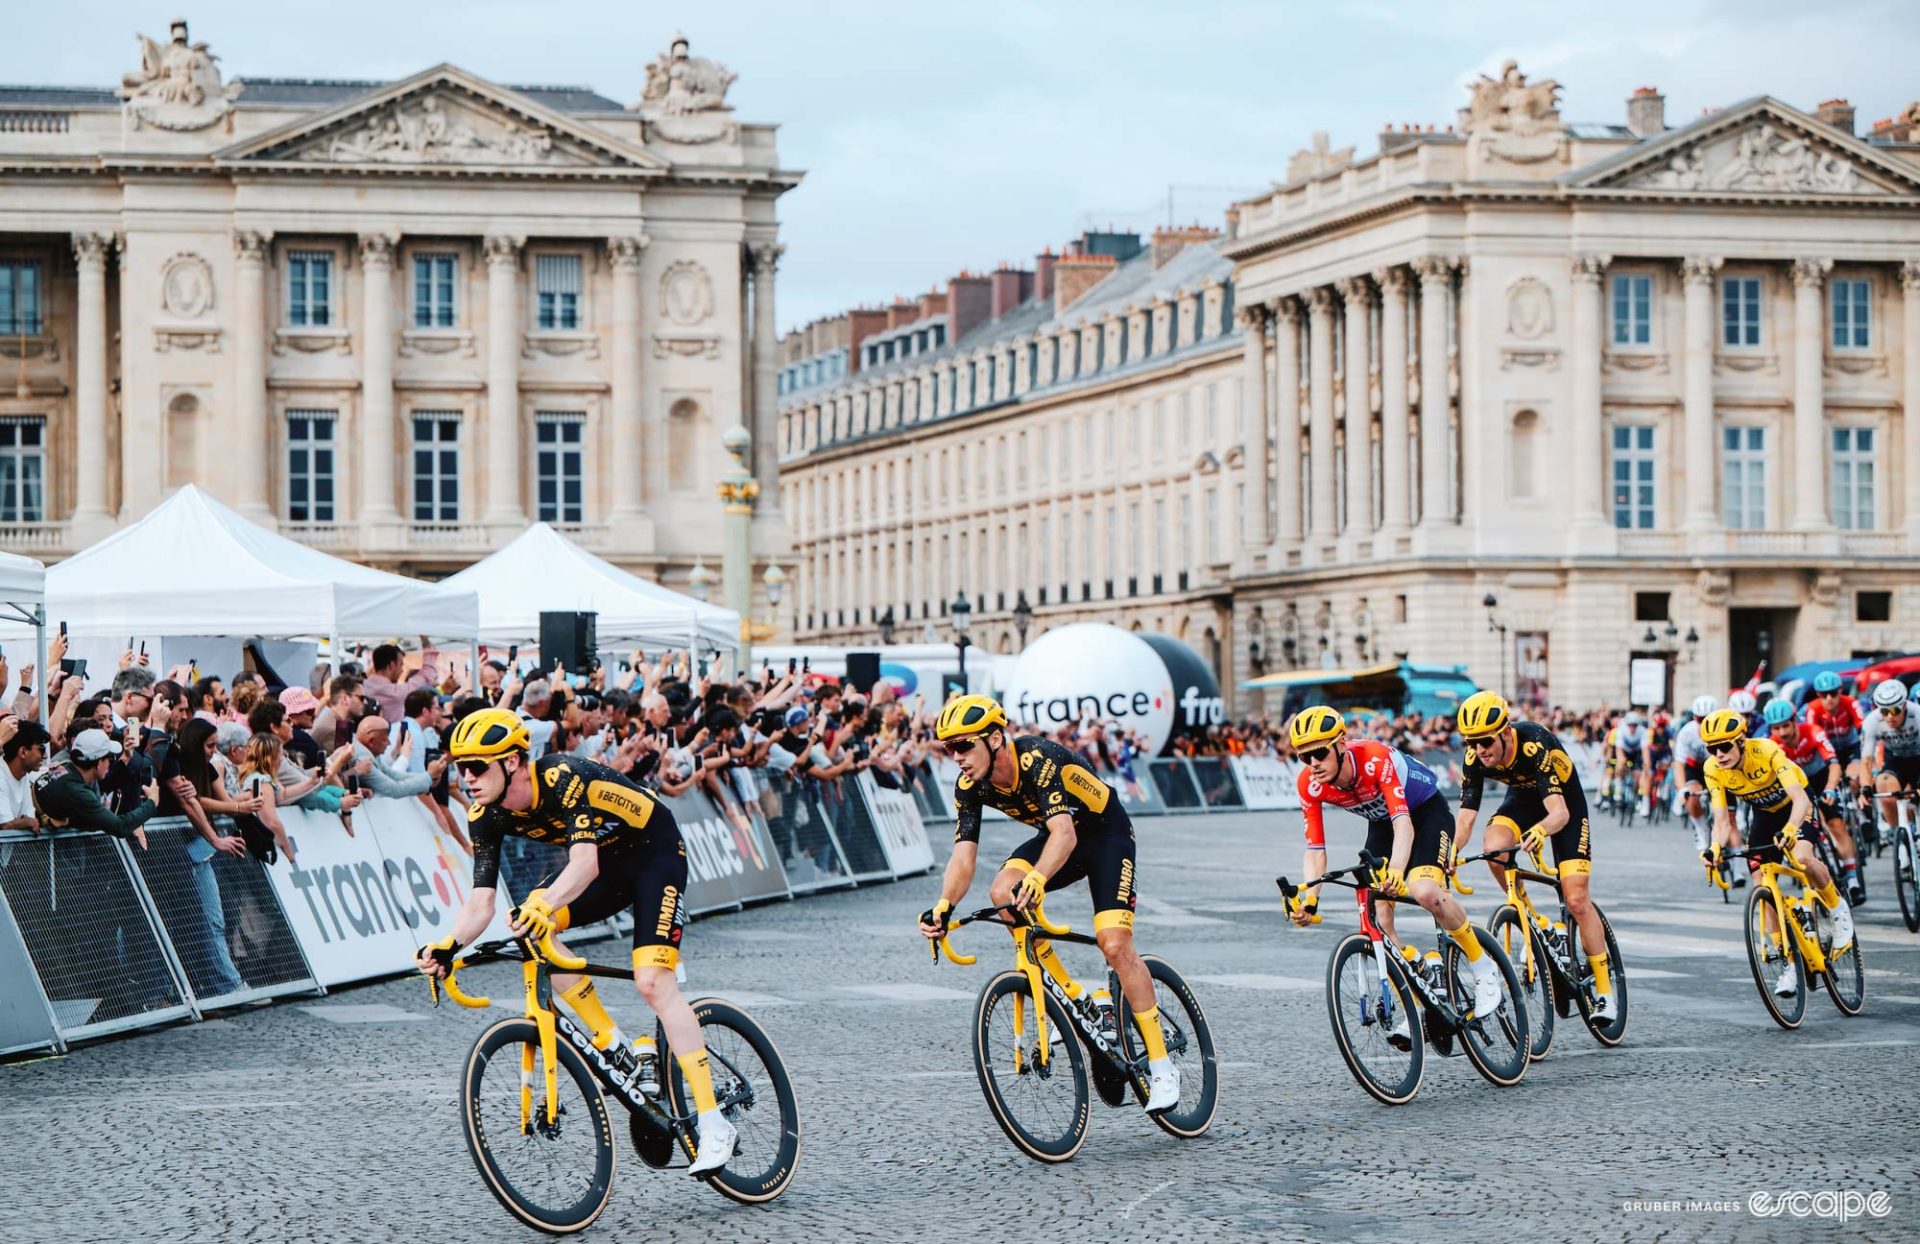 Nathan van Hooydonck leads the Jumbo-Visma onto the Champs-Elysées in the Tour de France. Christophe Laporte, Dylan van Baarle, and Tiesj Benoot follow while at the back of the line, Jonas Vingegaard is shown in the yellow jersey.